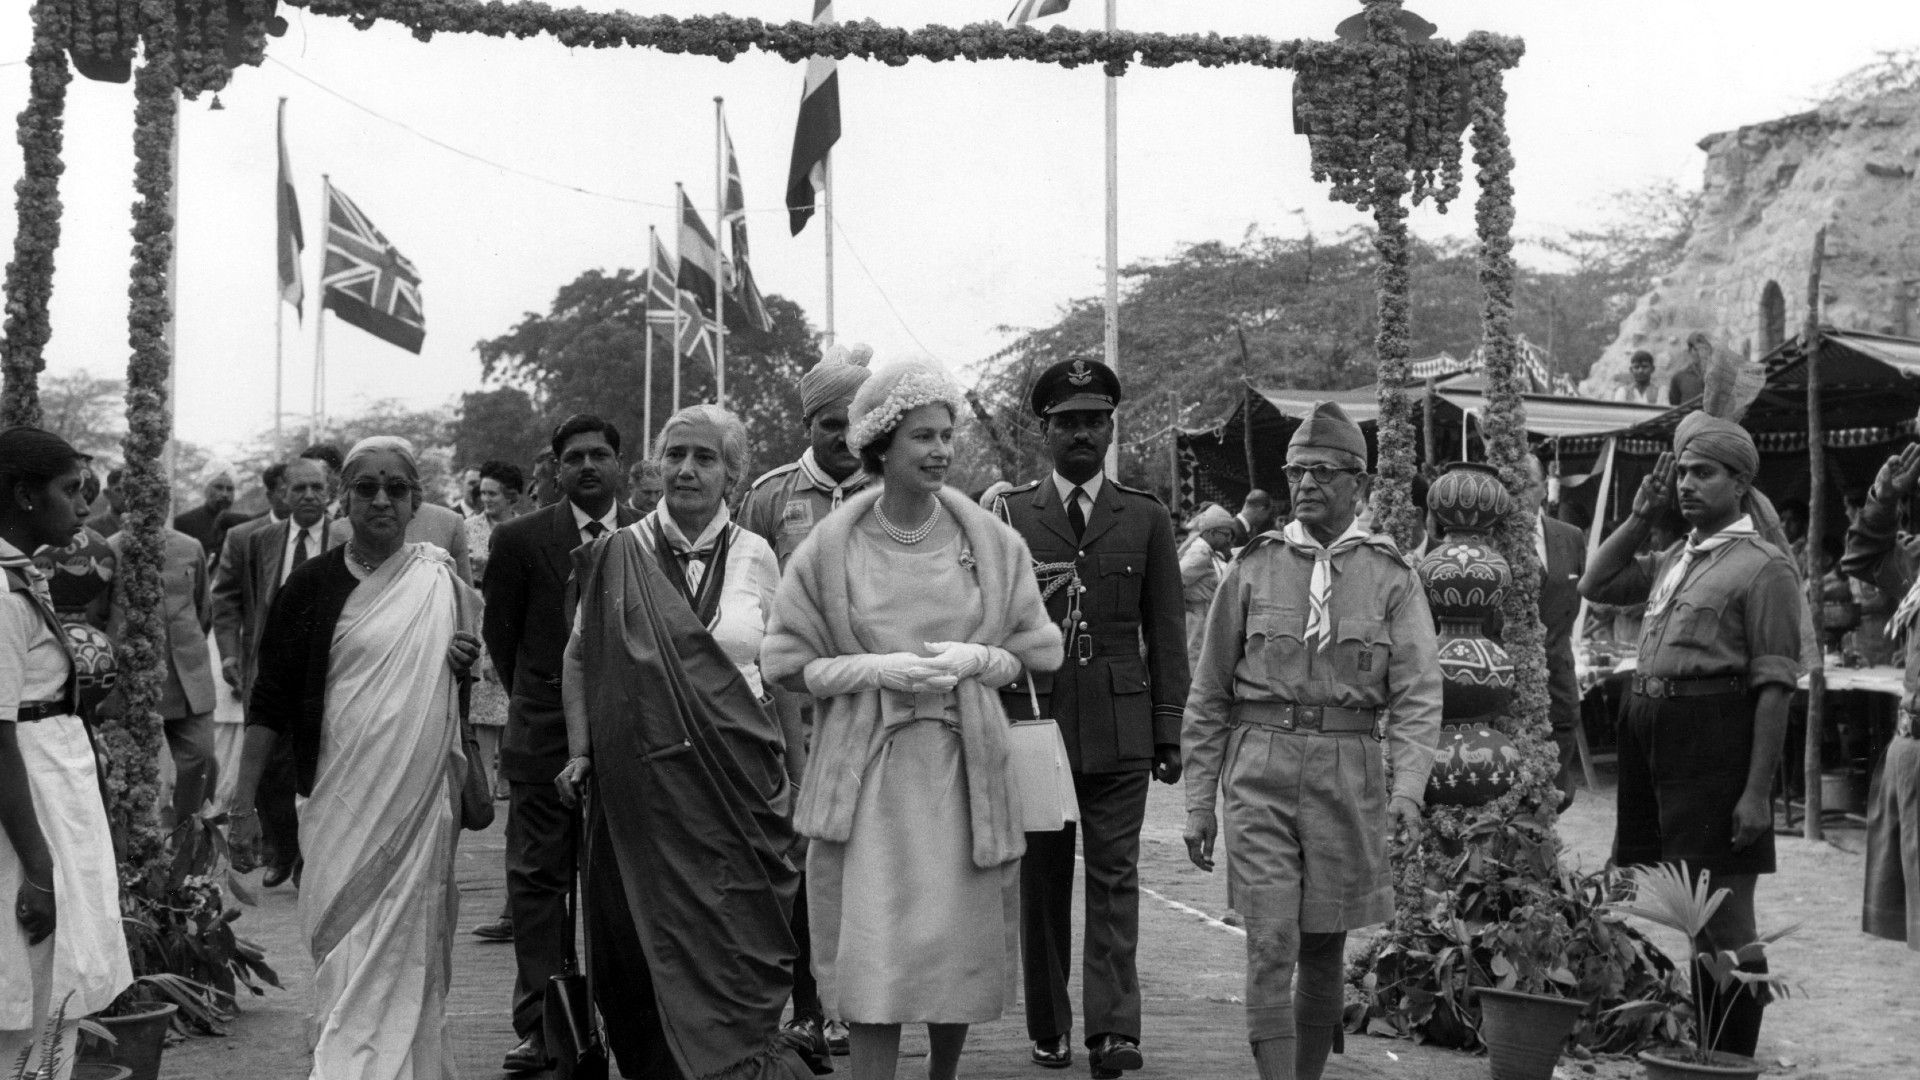 <p>                     Queen Elizabeth’s 1961 visit to India was a highly significant one, as it was the very first visit from a UK monarch following the end of the rule of the British Empire in the country.                   </p>                                      <p>                     The country gained independence in 1947, but prior to this, Elizabeth’s parents King George VI and Queen Elizabeth the Queen Mother were considered Emperor and Empress of India – titles which ceased to be used following the end of the Empire in India.                   </p>                                      <p>                     As such, Queen Elizabeth’s visit to India in the early 60s was significant, as it was the first time a monarch had visited without being considered as 'head' of the country. During her trip, alongside Prince Philip, she paid a visit to the Taj Mahal and to New Delhi, and attended the annual Commonwealth Heads of Government Meeting. She also met with Mother Theresa, whom she presented with an honorary Order of Merit.                   </p>